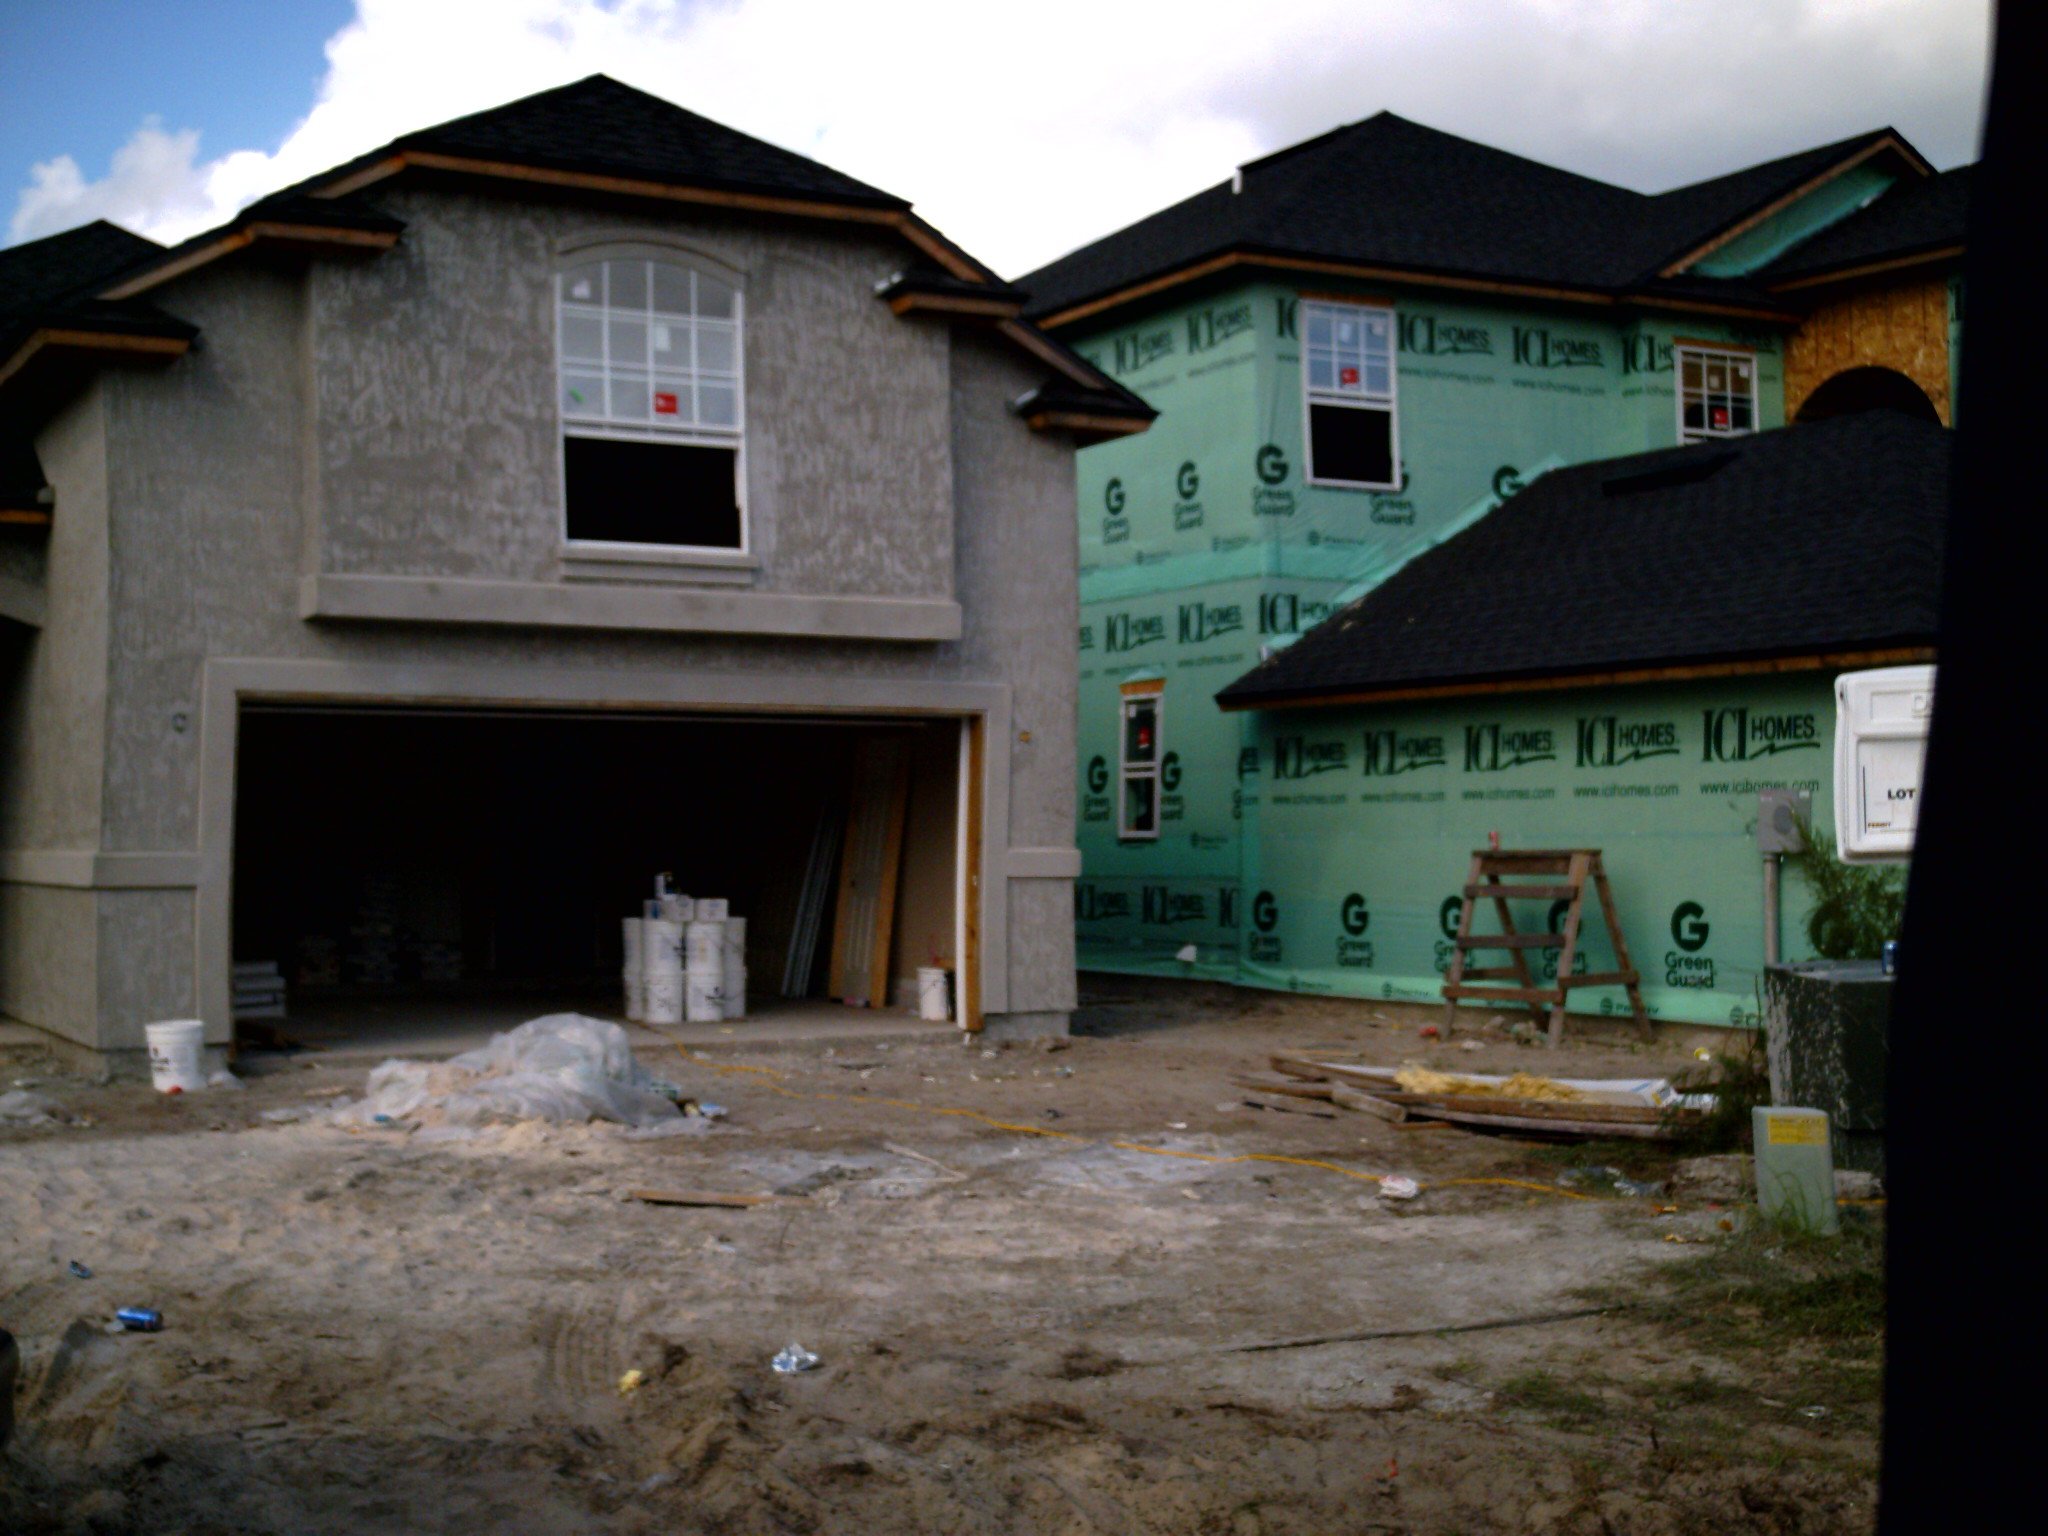 New Homes Under Construction